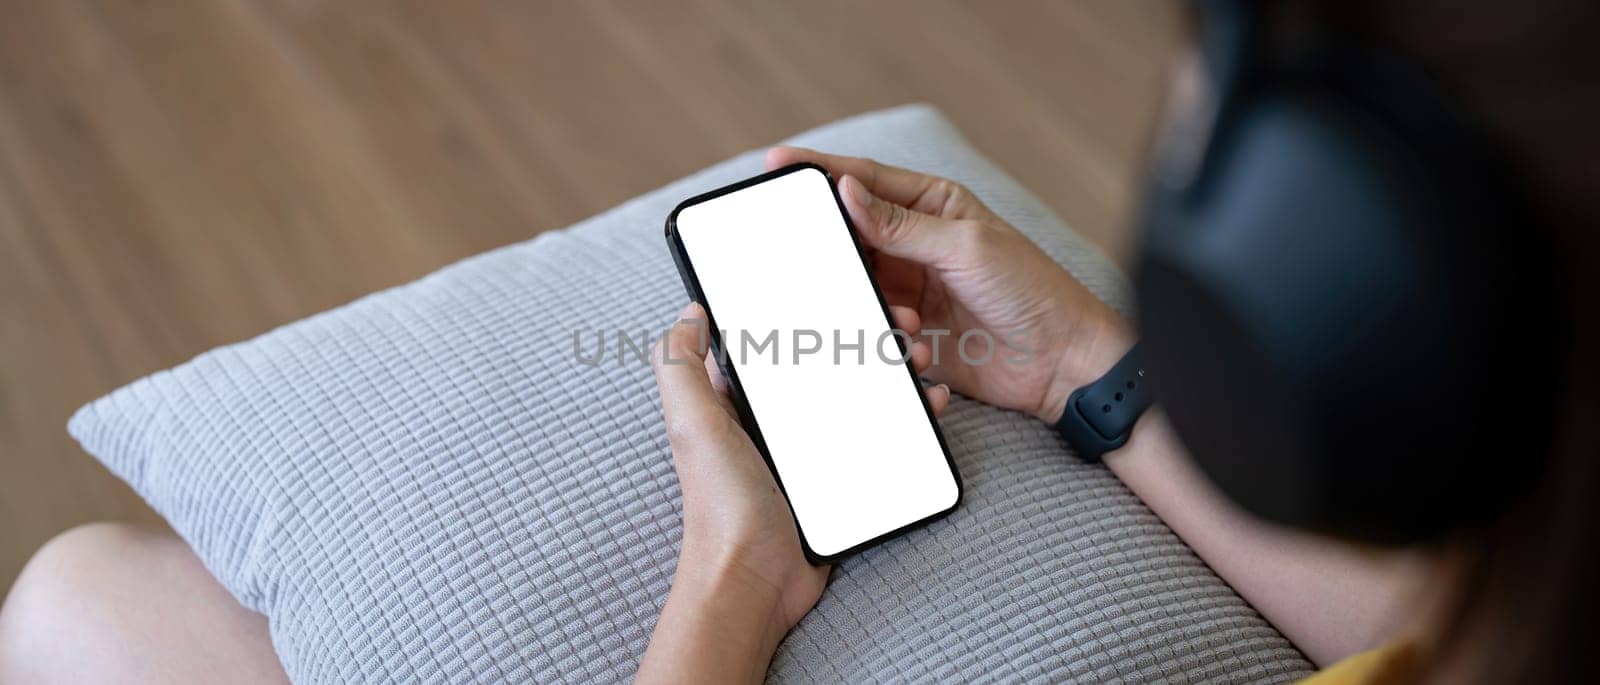 Mockup smartphone of a woman holding mobile phone with blank white screen while sitting listen to music at home.